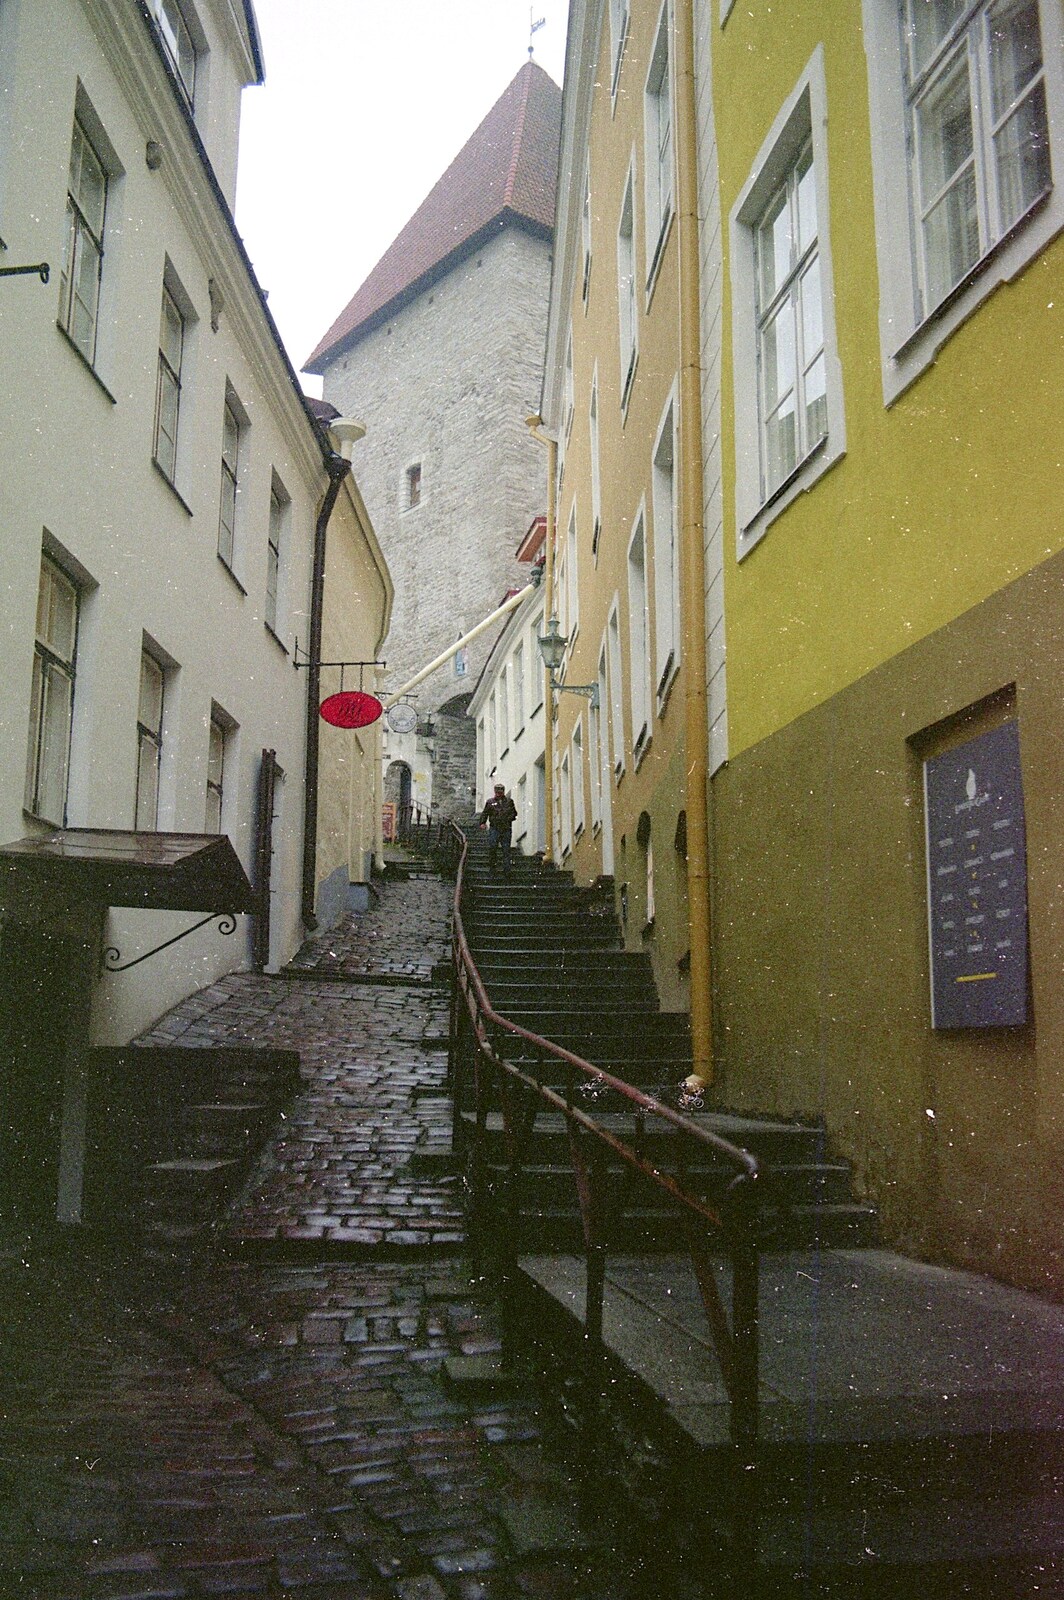 Cobbled streets and steps from A Day Trip to Tallinn, Estonia - 2nd December 1999